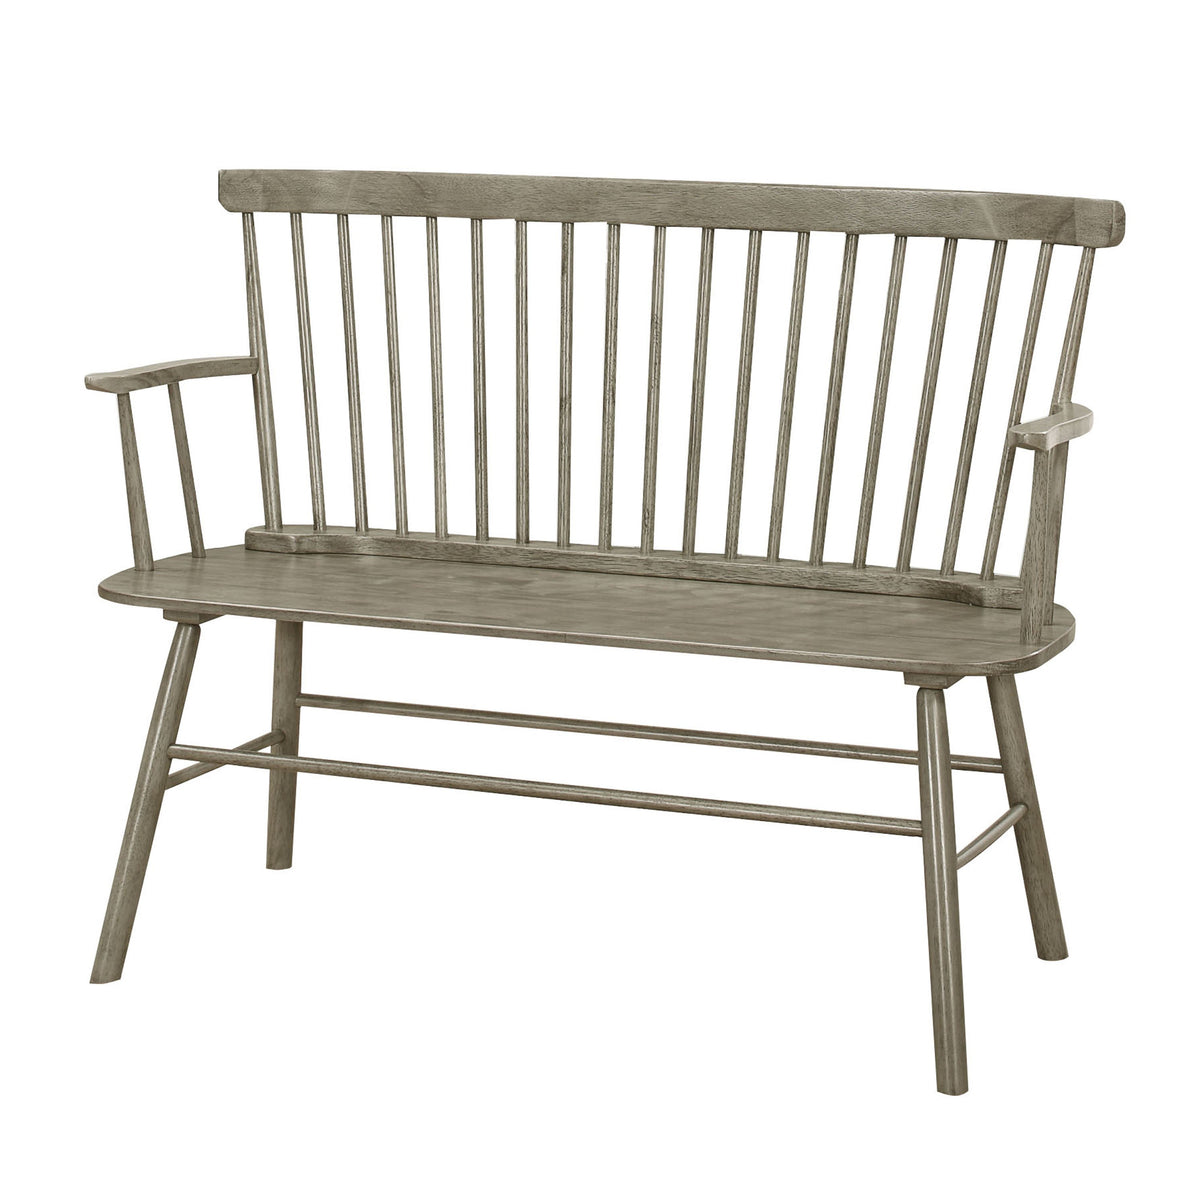 Transitional Style Curved Design Spindle Back Bench with Splayed Legs,Gray - BM215323